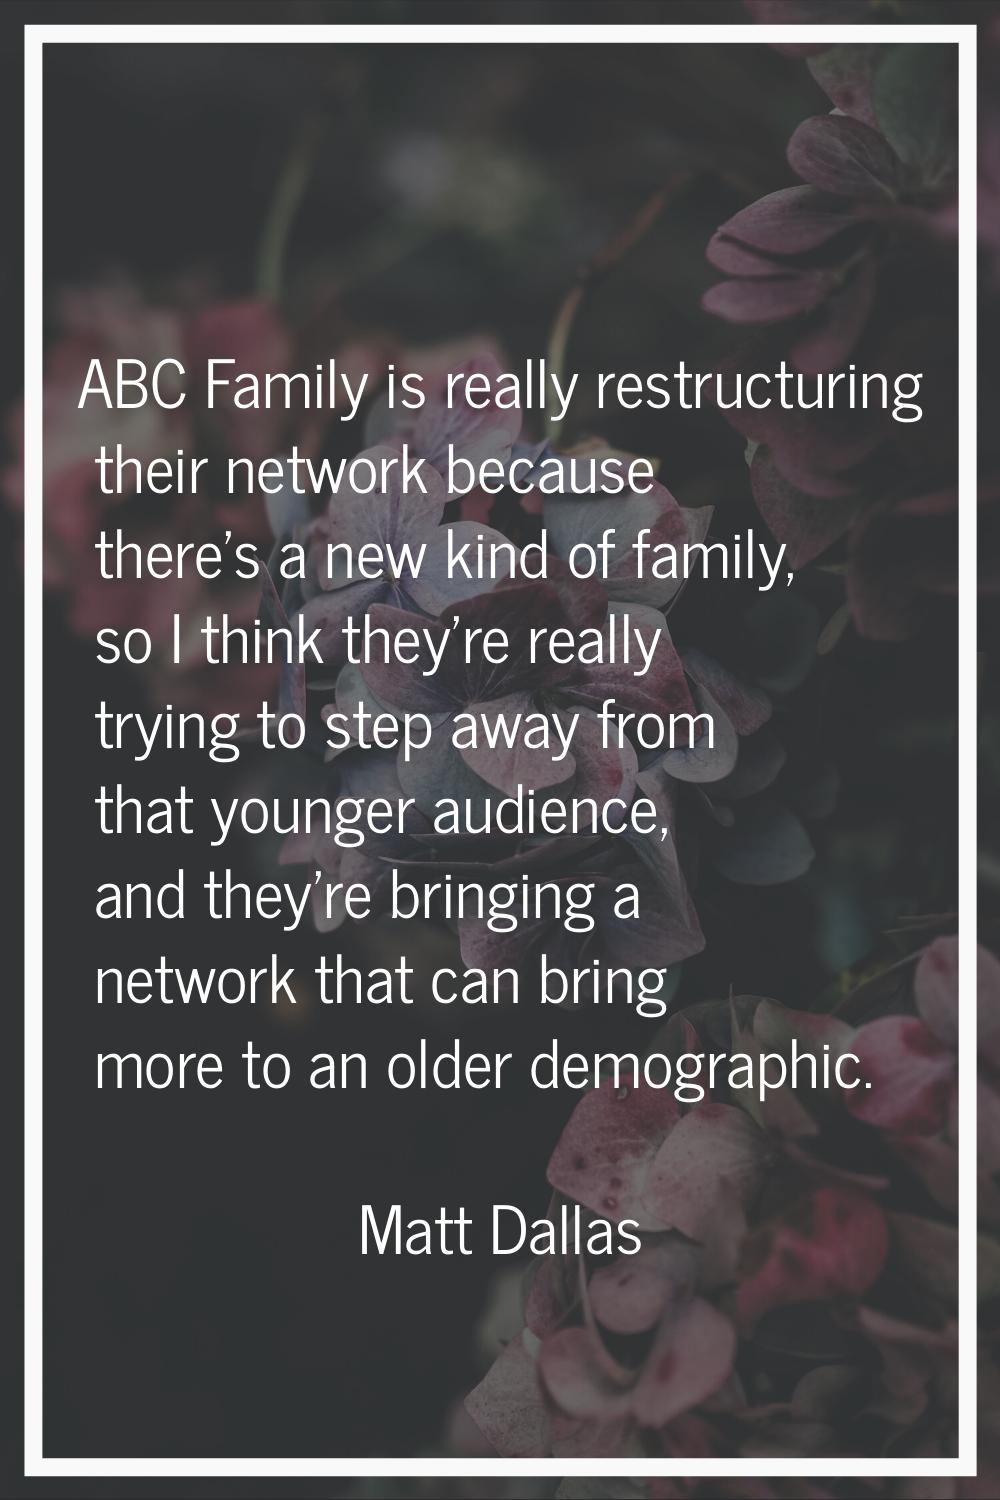 ABC Family is really restructuring their network because there's a new kind of family, so I think t